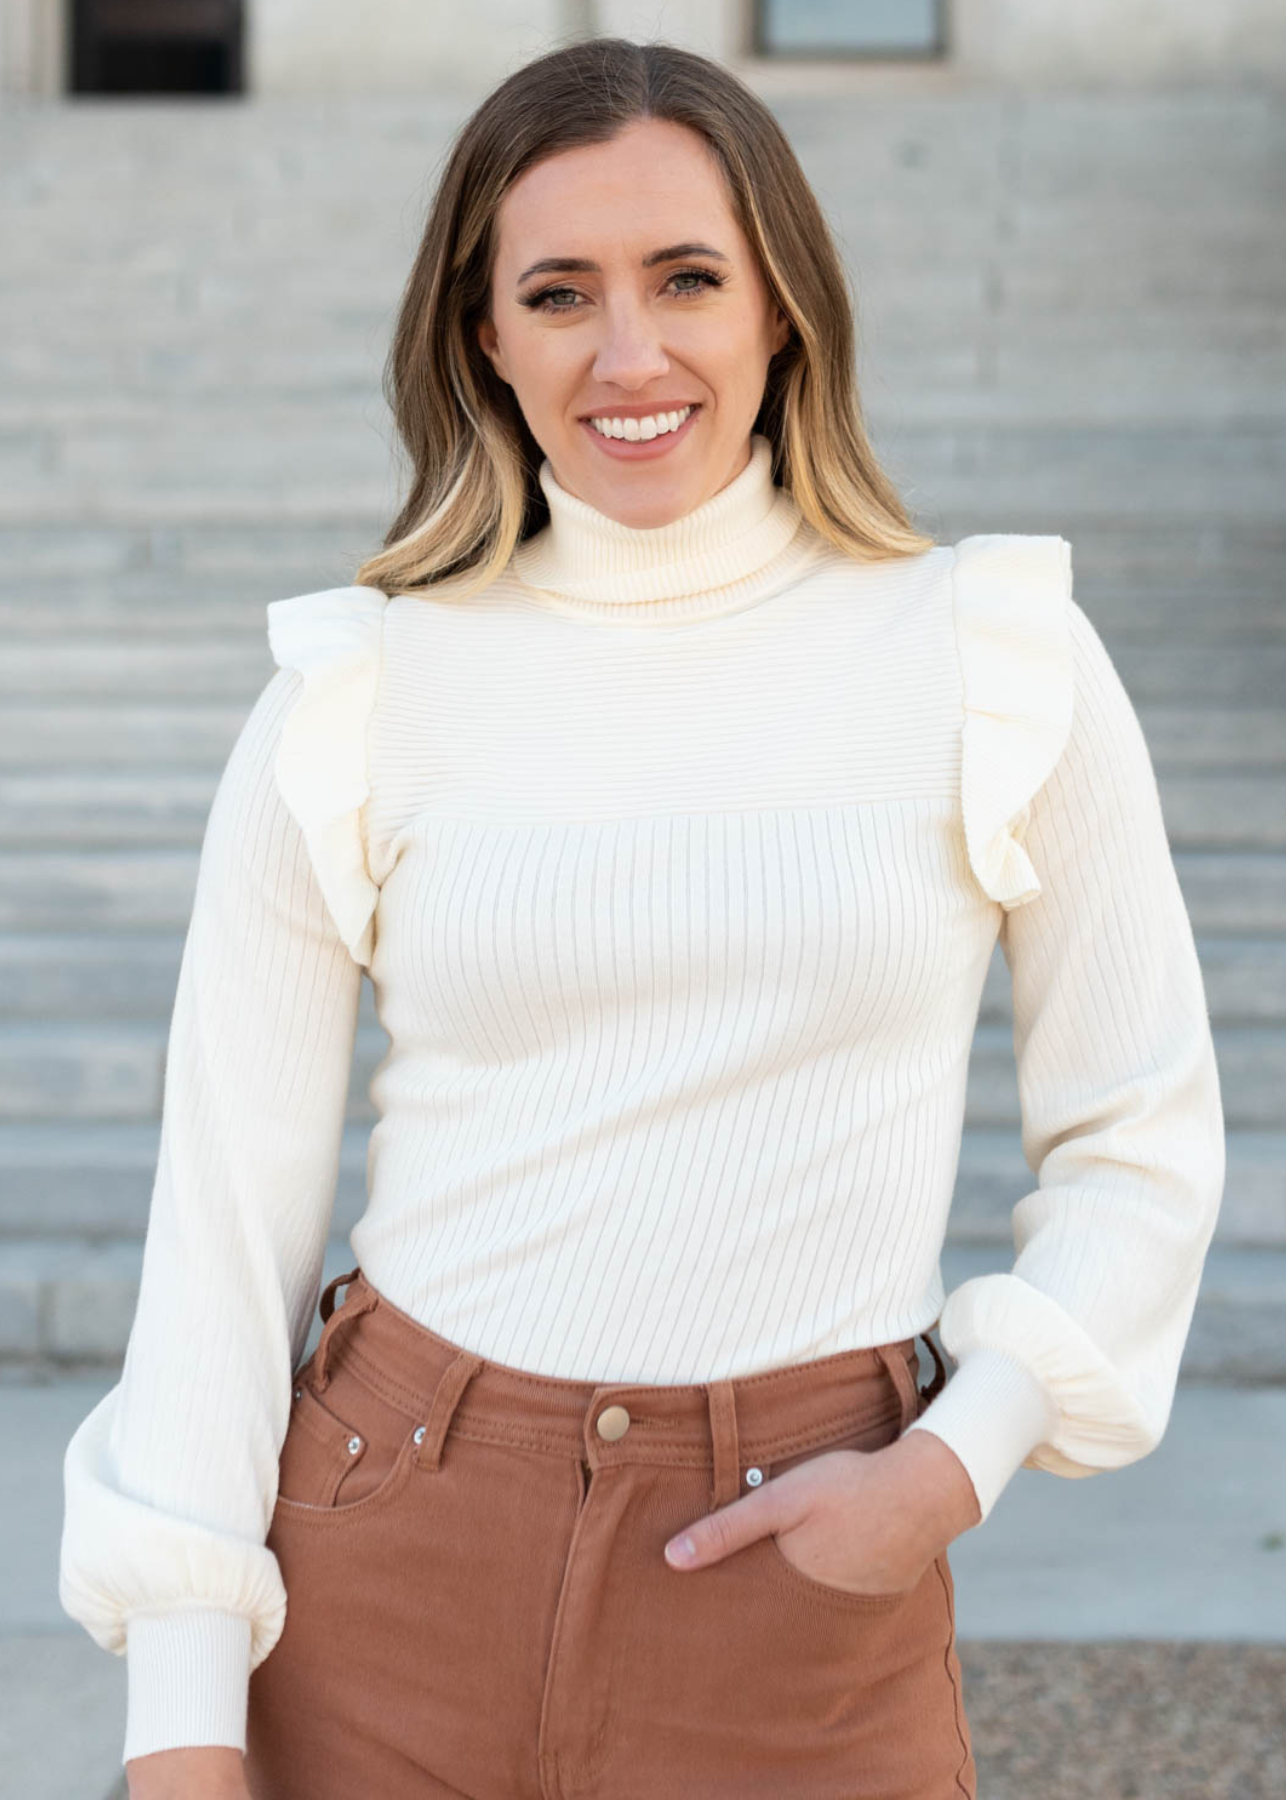 Ivory ruffle turtleneck sweater with ruffles at the shoulders